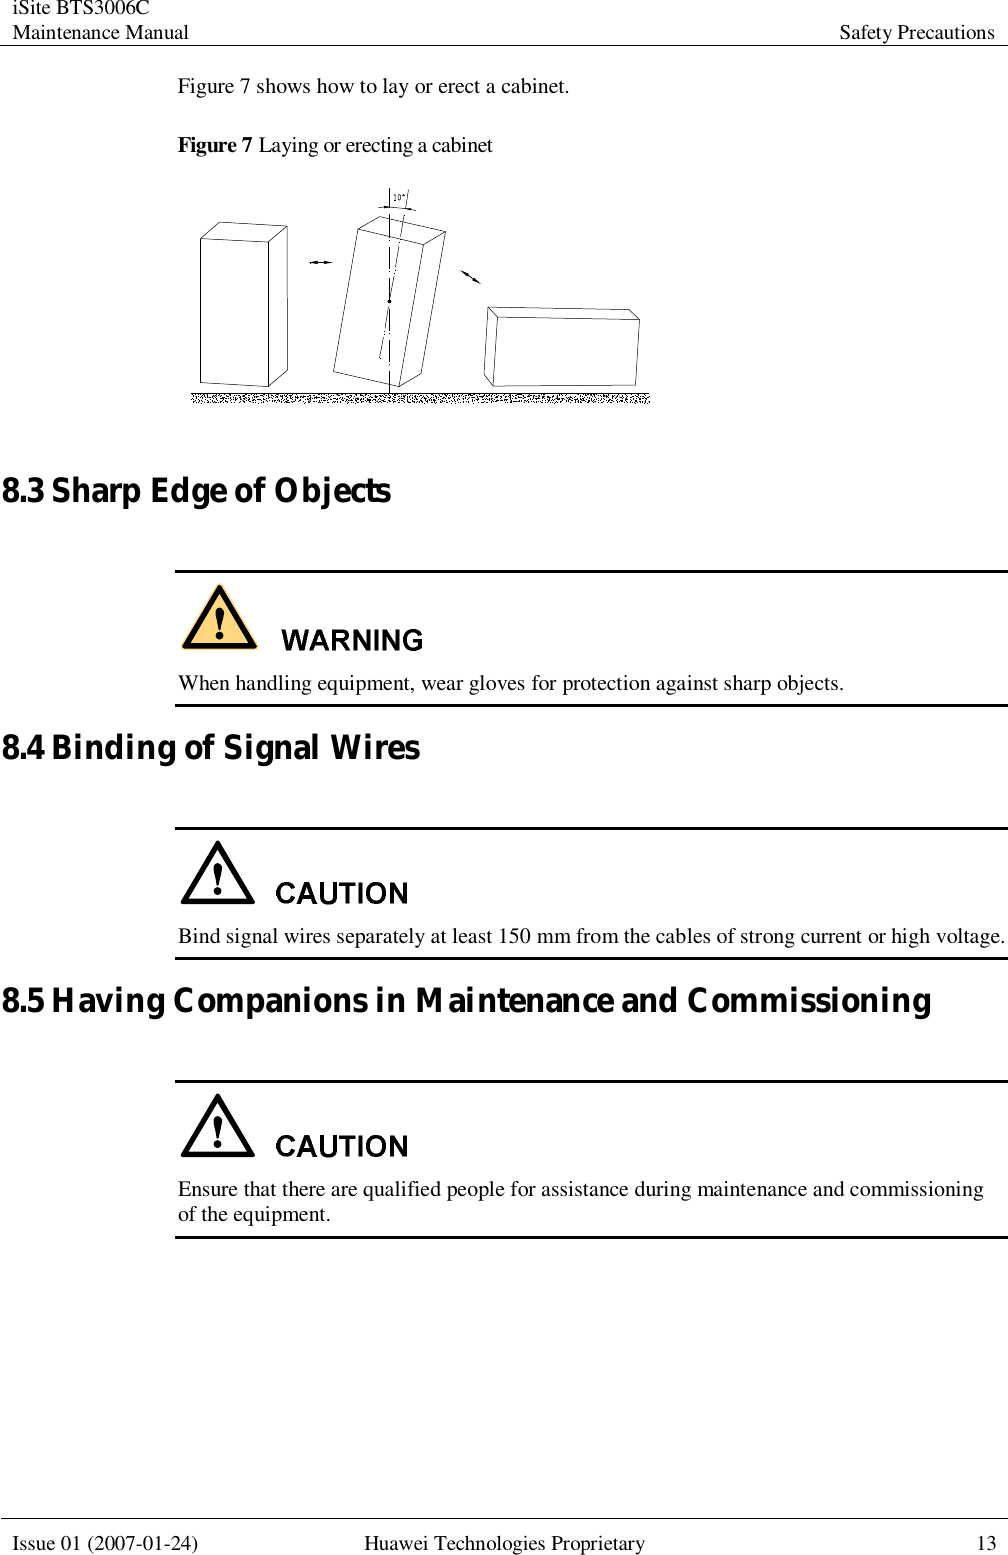 iSite BTS3006C Maintenance Manual Safety Precautions  Issue 01 (2007-01-24) Huawei Technologies Proprietary 13  Figure 7 shows how to lay or erect a cabinet. Figure 7 Laying or erecting a cabinet   8.3 Sharp Edge of Objects   When handling equipment, wear gloves for protection against sharp objects. 8.4 Binding of Signal Wires   Bind signal wires separately at least 150 mm from the cables of strong current or high voltage. 8.5 Having Companions in Maintenance and Commissioning   Ensure that there are qualified people for assistance during maintenance and commissioning of the equipment. 